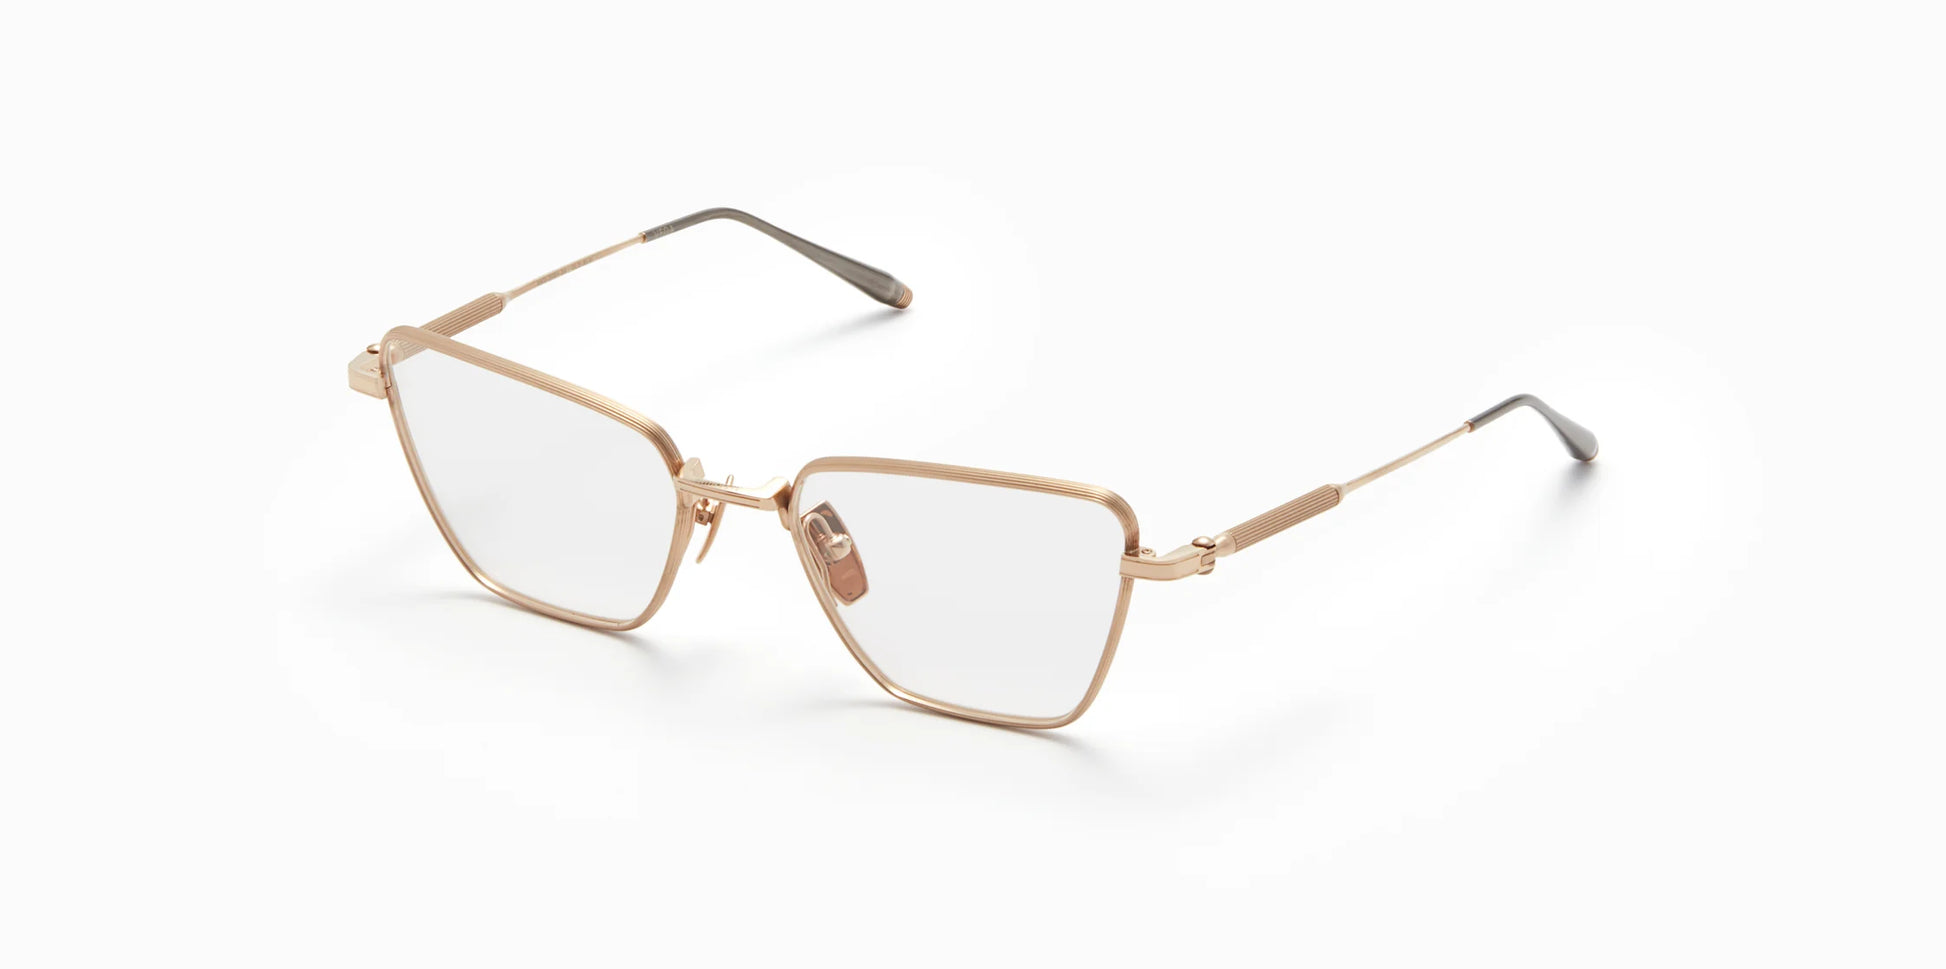 Three-quarter profile view of Akoni's new "Vega" frame in the brushed white gold colorway.